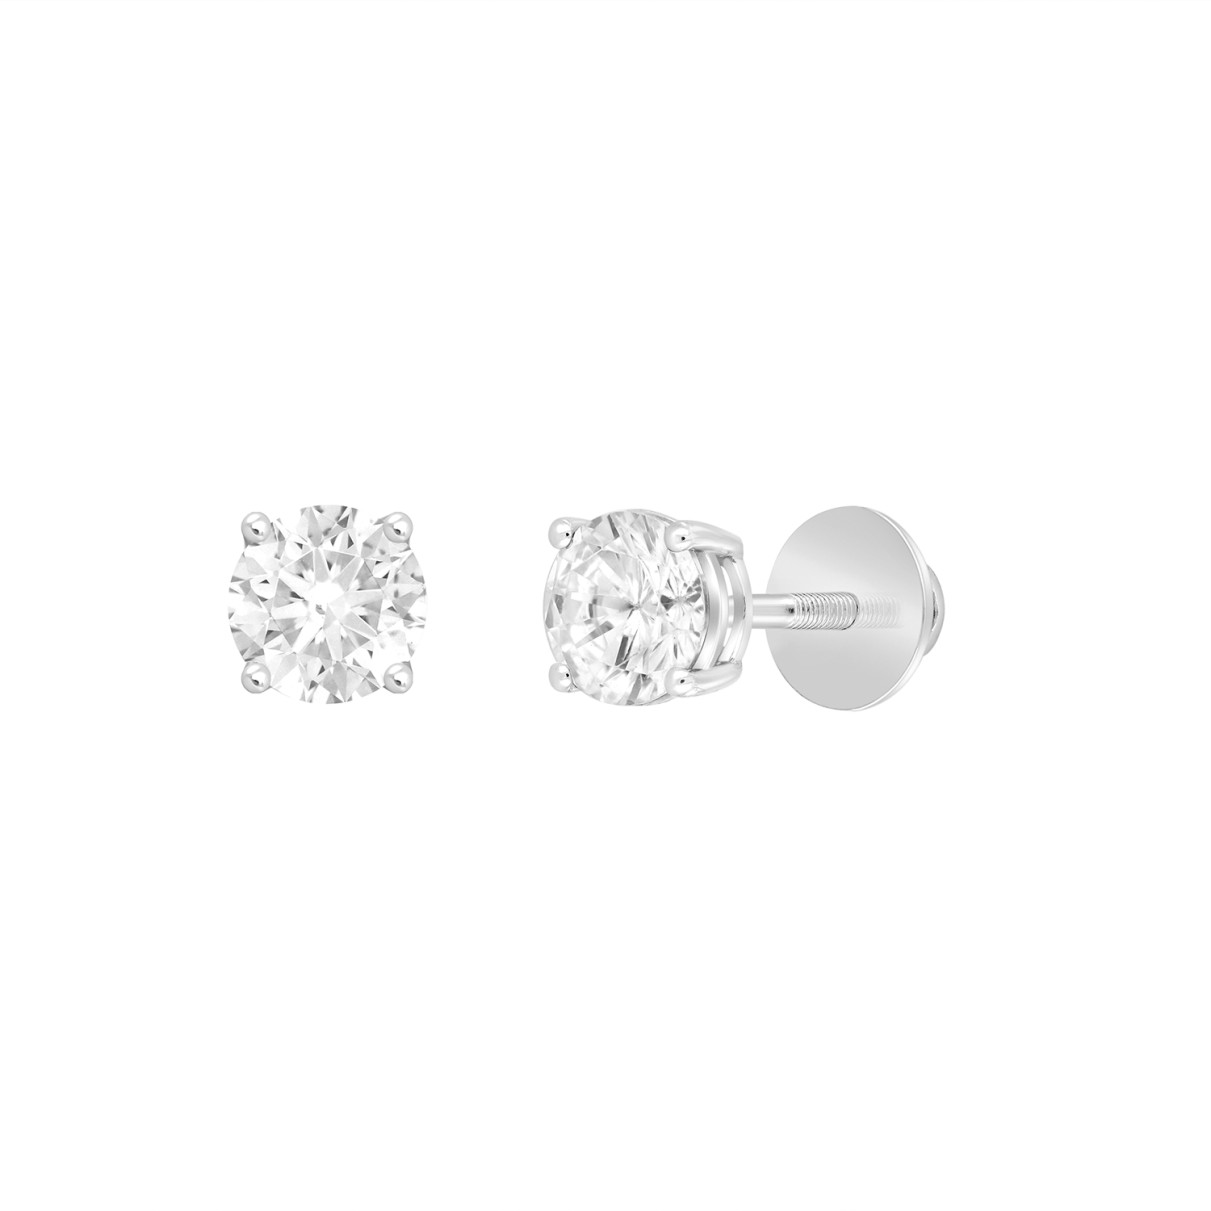 LADIES SOLITAIRE EARRINGS 1 1/2CT ROUND DIAMOND 14K WHITE GOLD